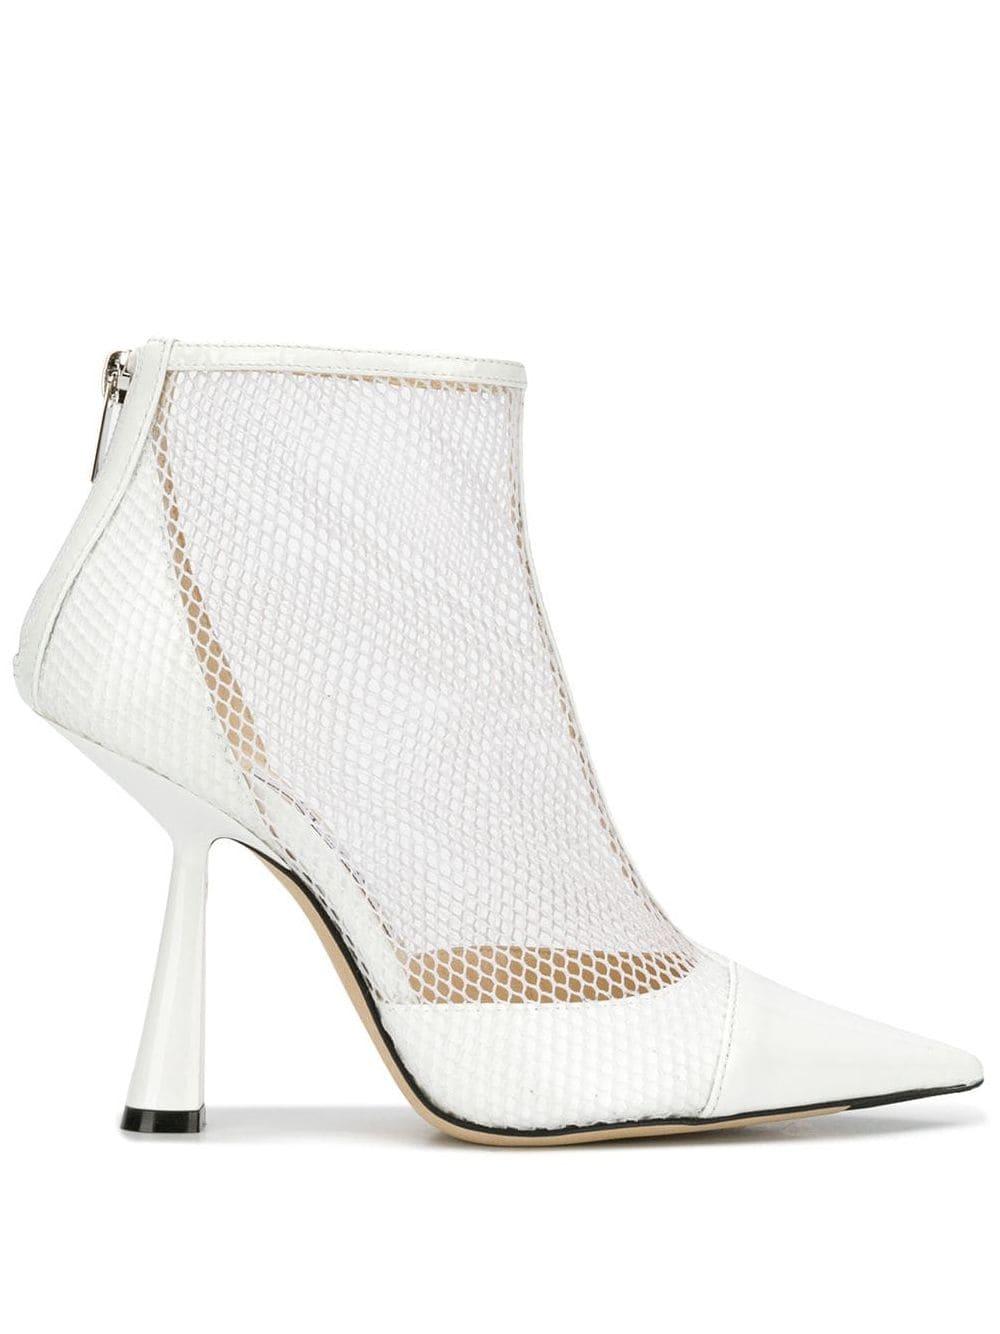 Jimmy Choo Leather Kix 100 Patent Mesh Heeled Boots in White 